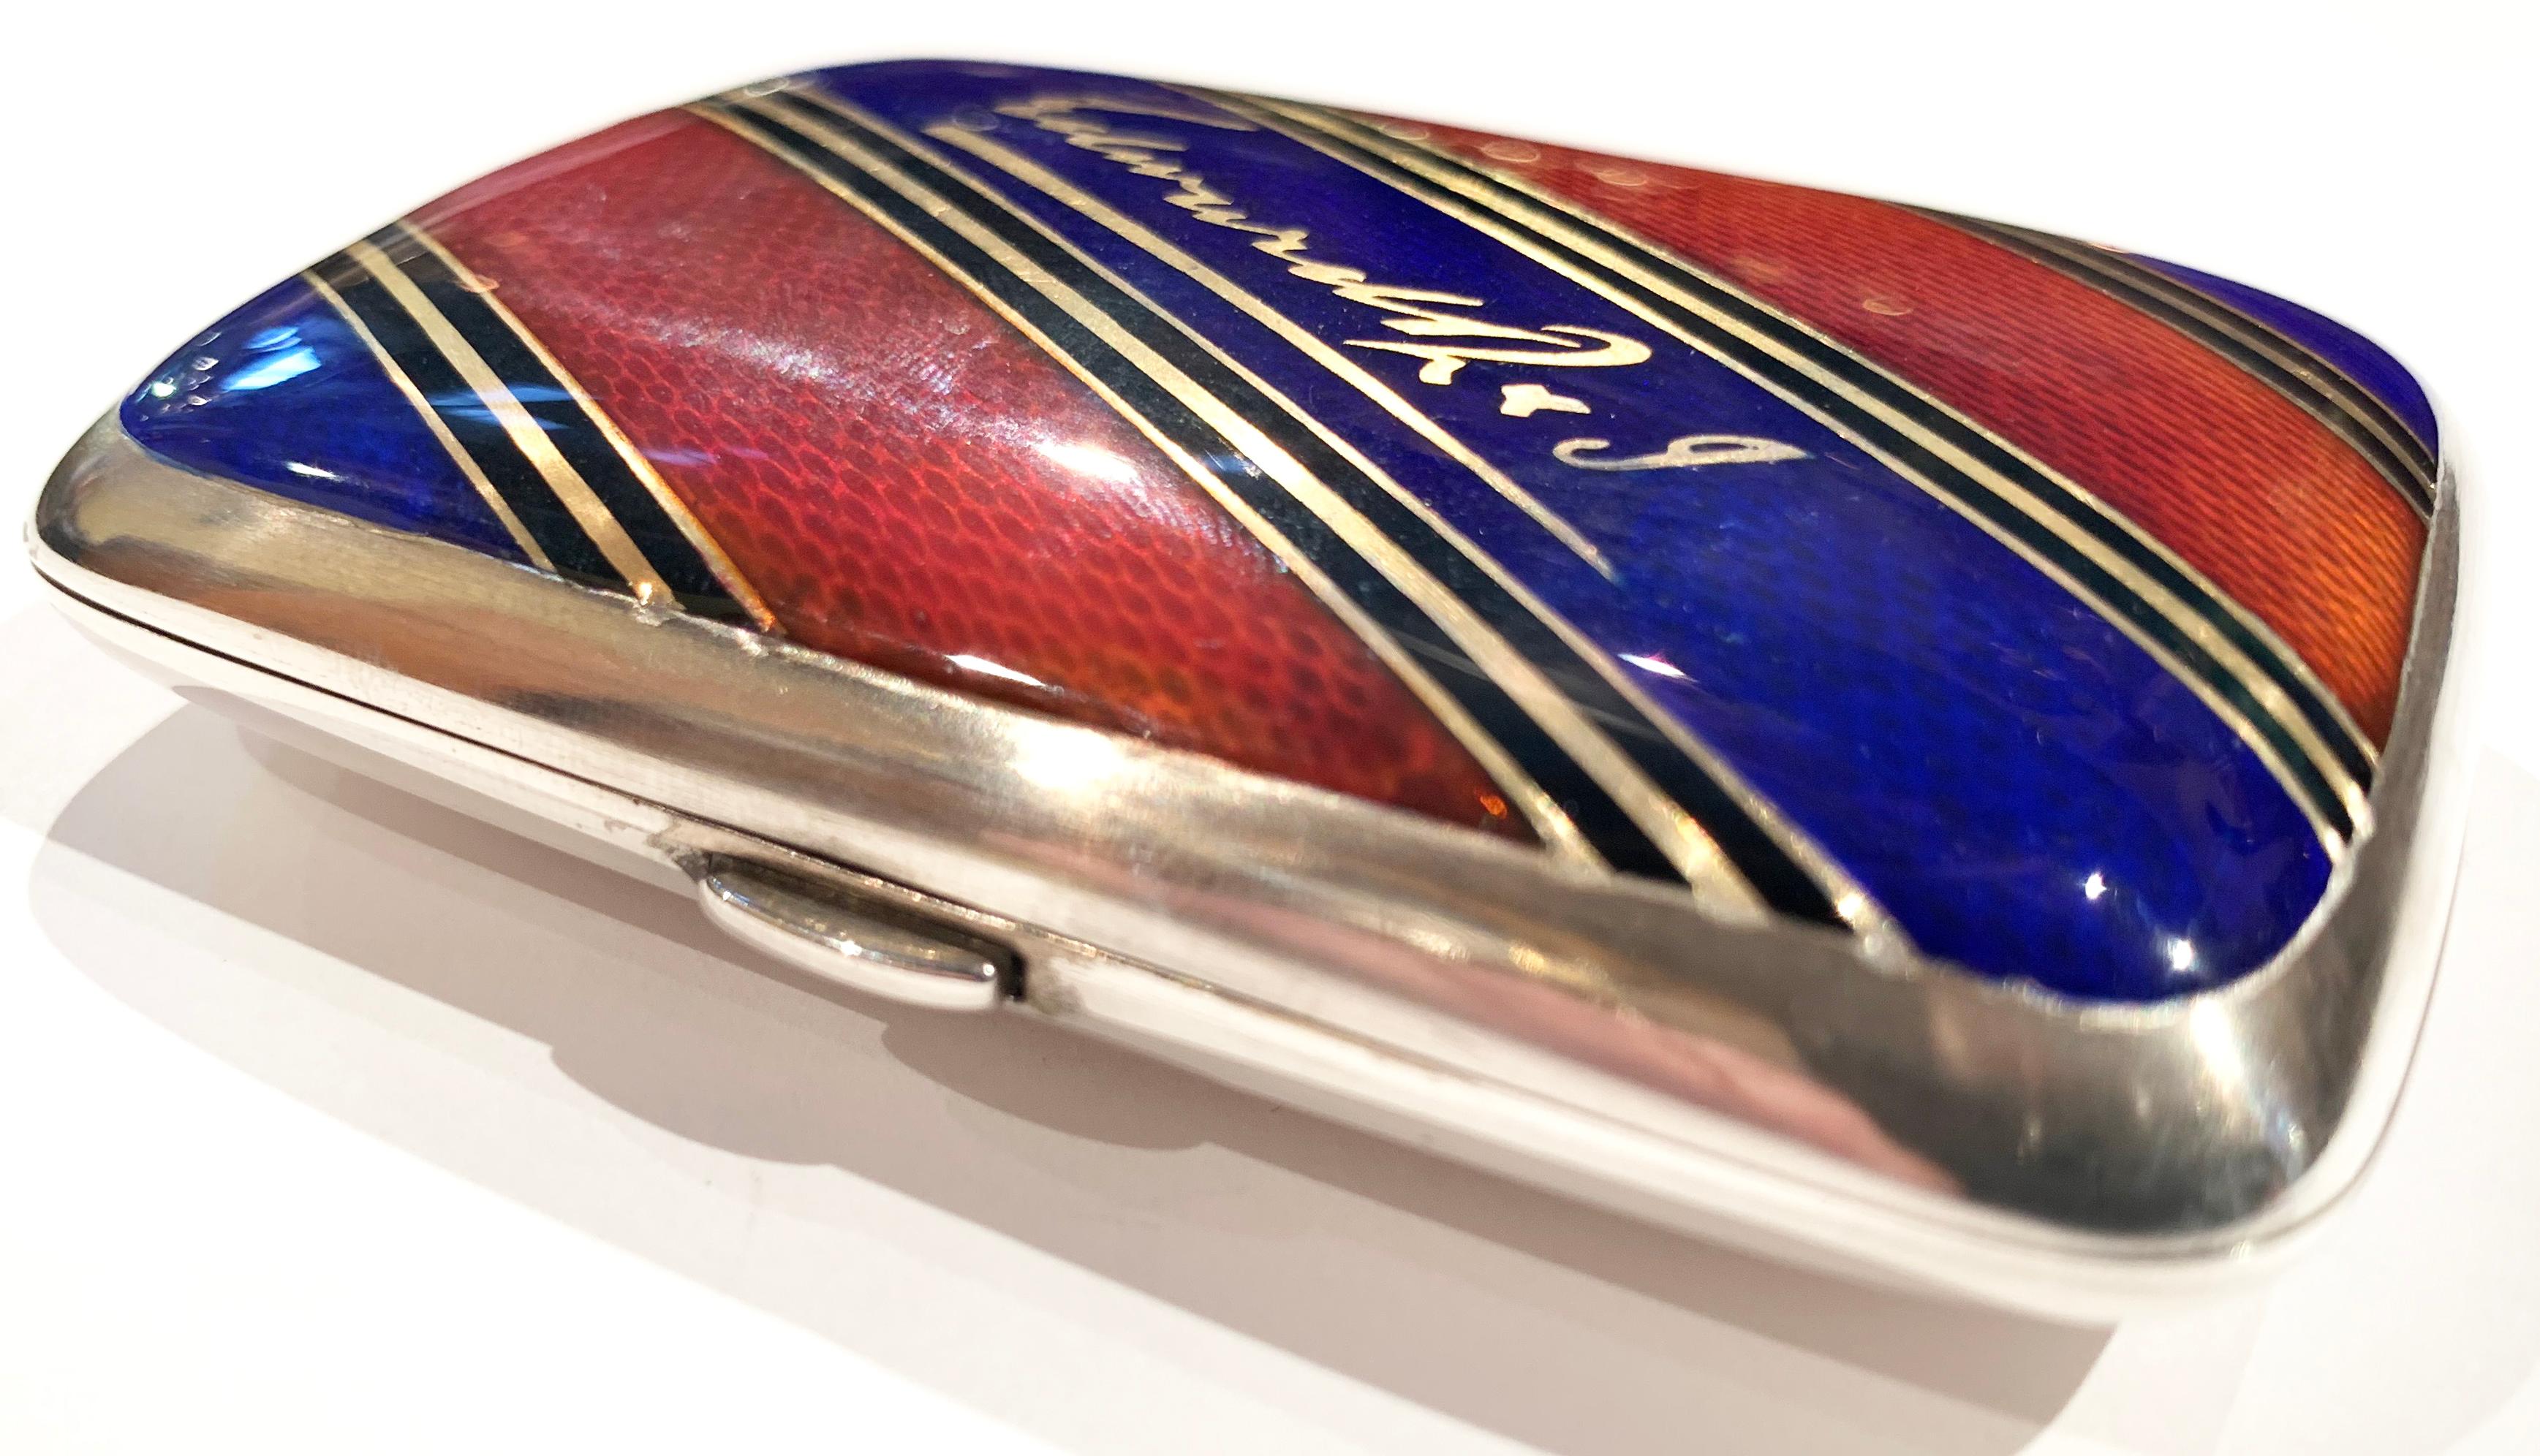 English King Edward VII's Personal Cigarette Case, Silver,  Red & Blue Enamel and Gold For Sale